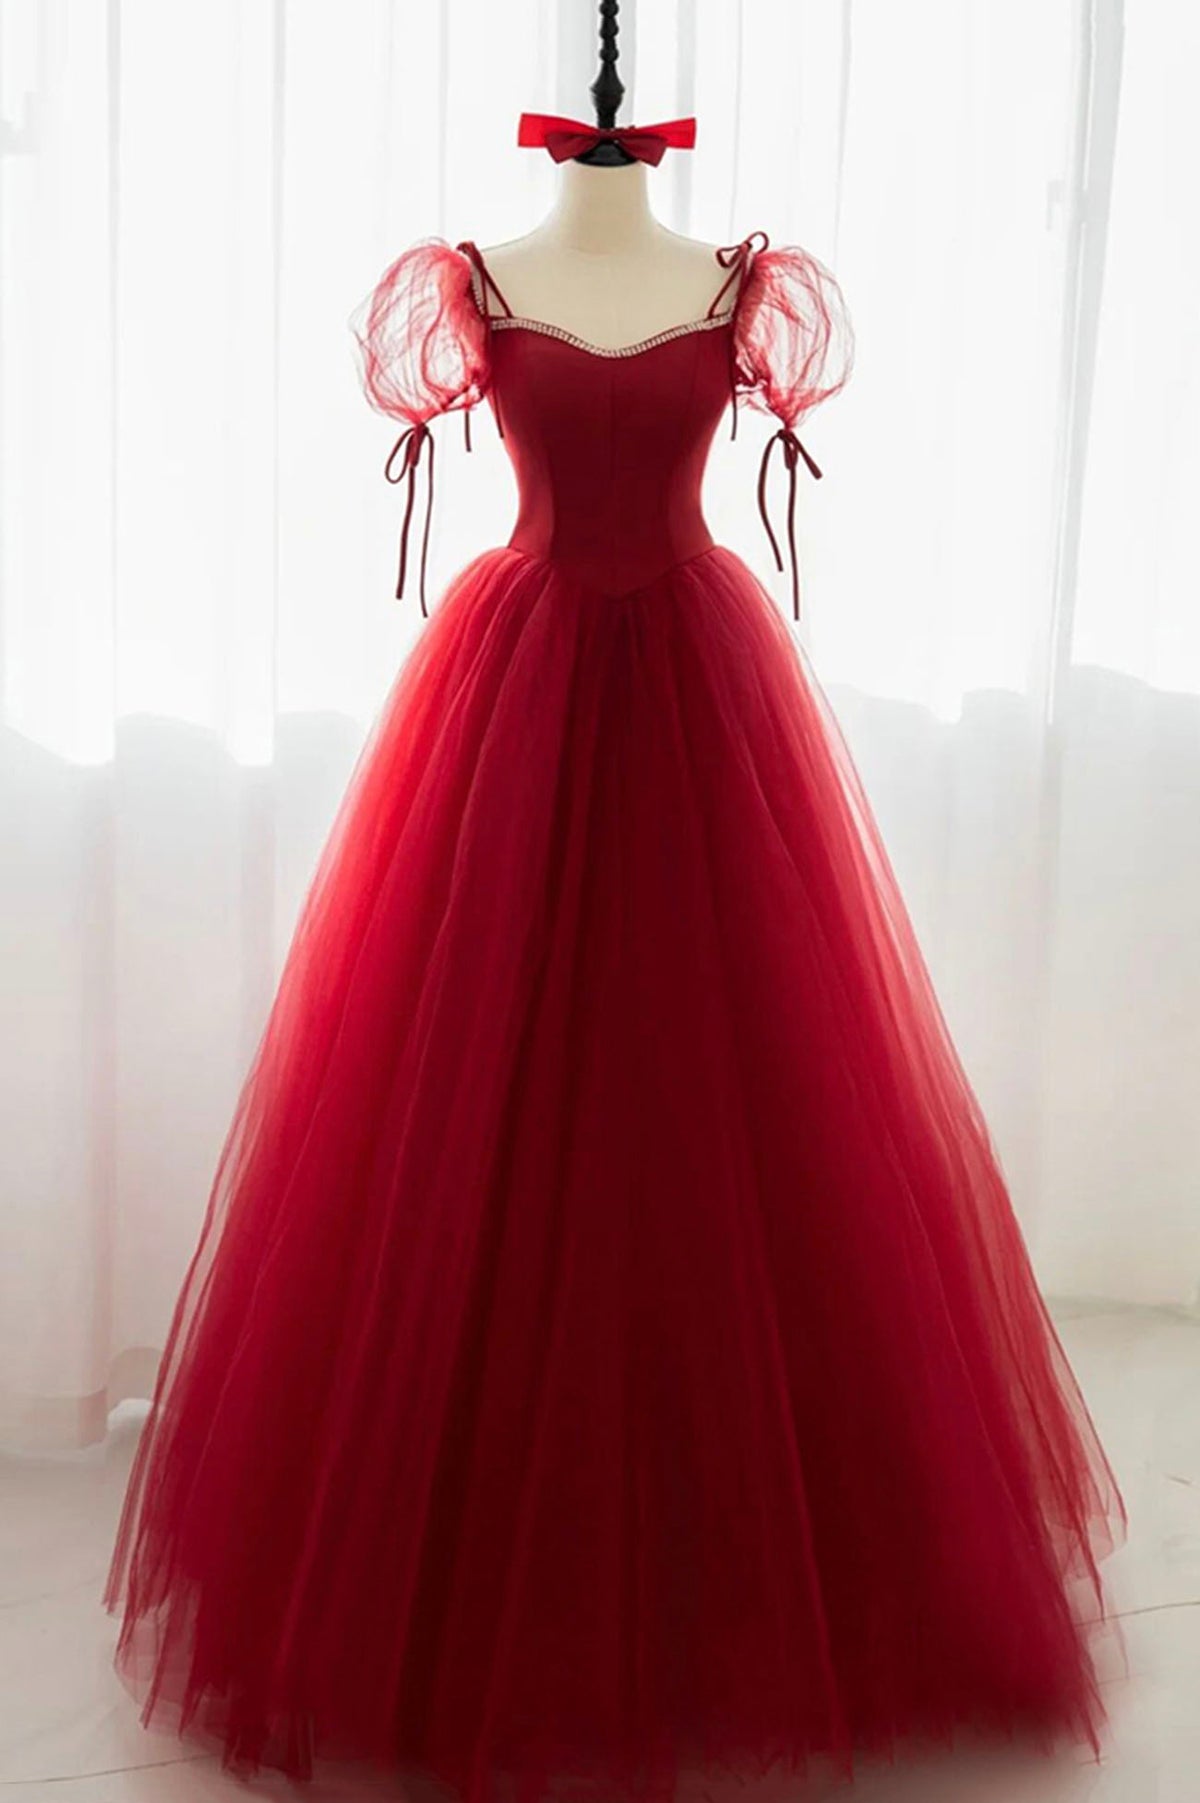 vigocouture Red Tea-Length Prom Dresses Spaghetti Strap Dotted Tulle Homecoming Dress 21758 Custom Colors / 16W